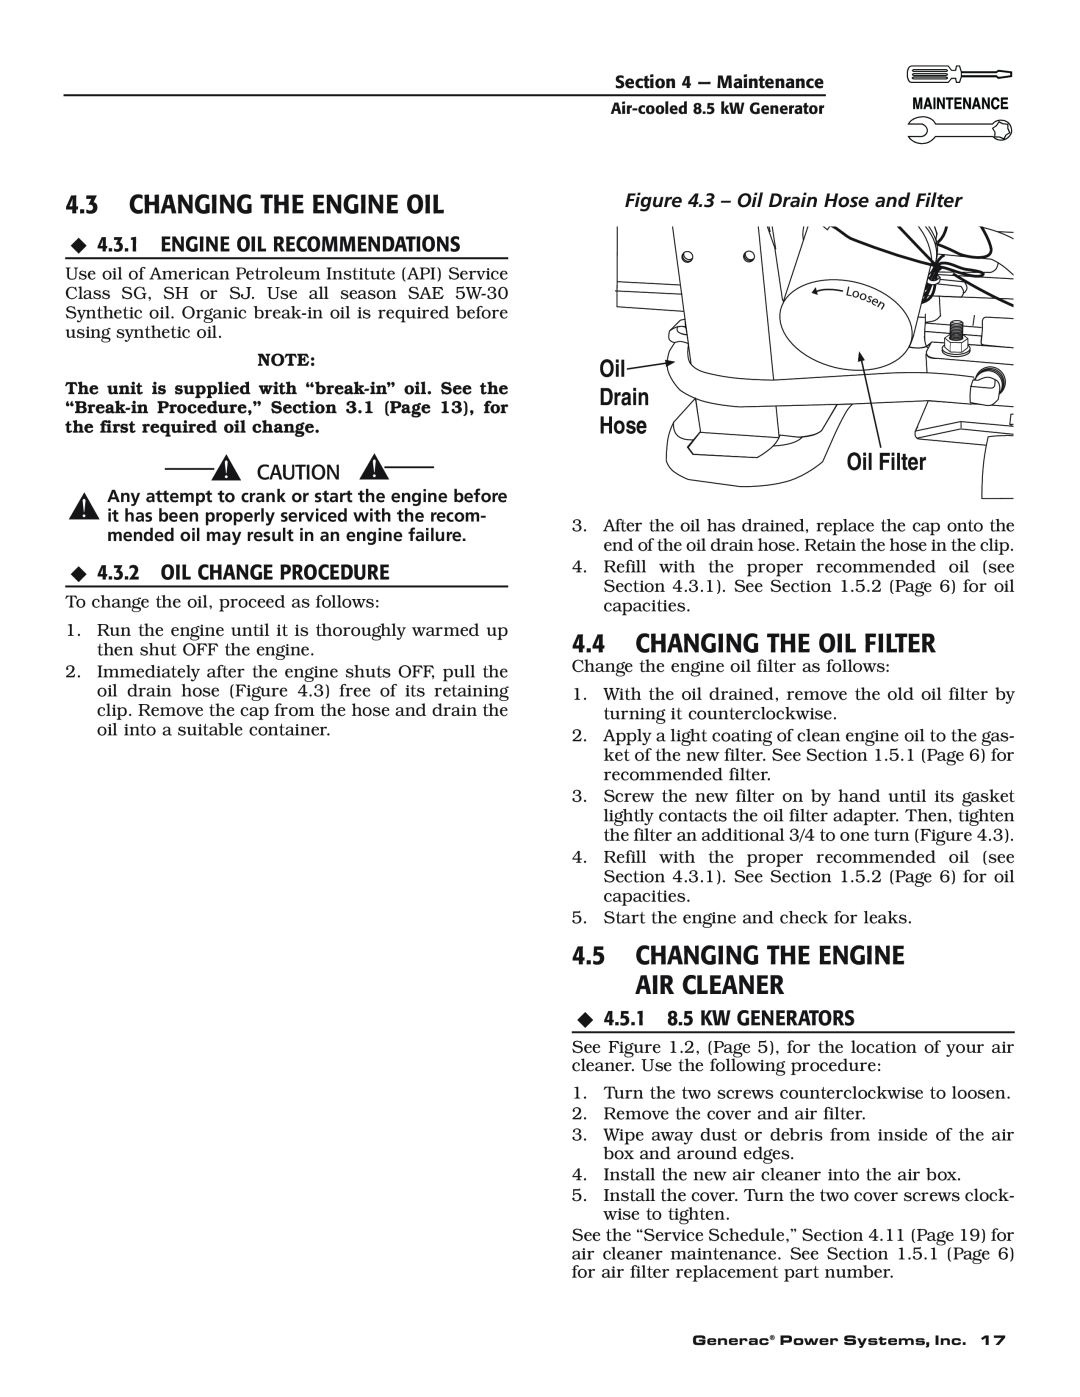 Generac 004692-0 owner manual 4.3CHANGING THE ENGINE OIL, 4.4CHANGING THE OIL FILTER, 4.5CHANGING THE ENGINE AIR CLEANER 